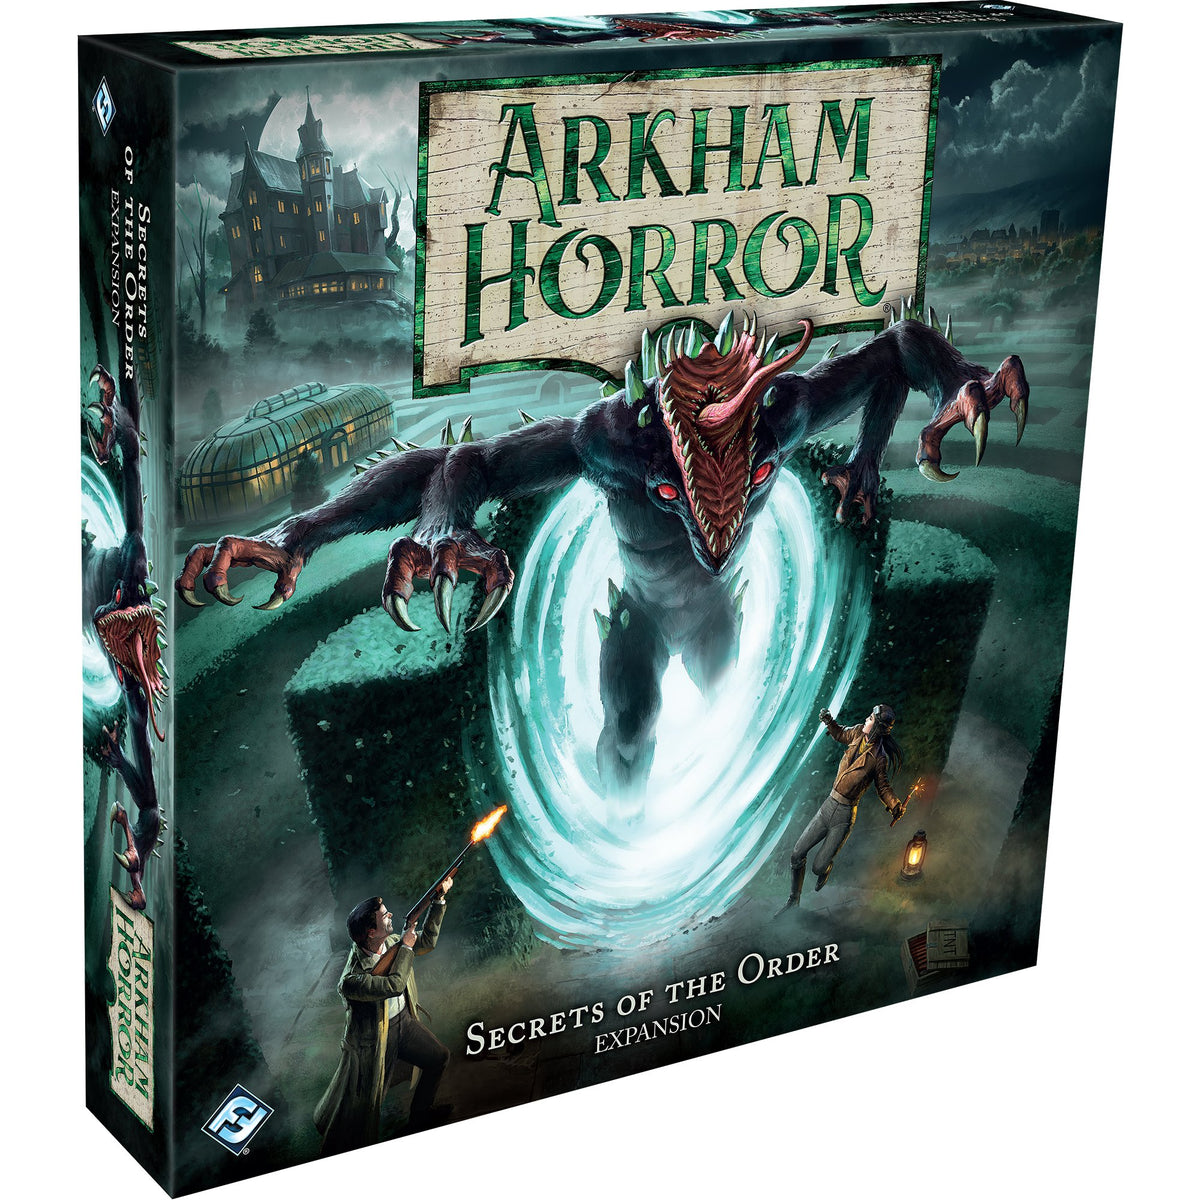 Arkham Horror Third Edition - Secrets of the Order Expansion